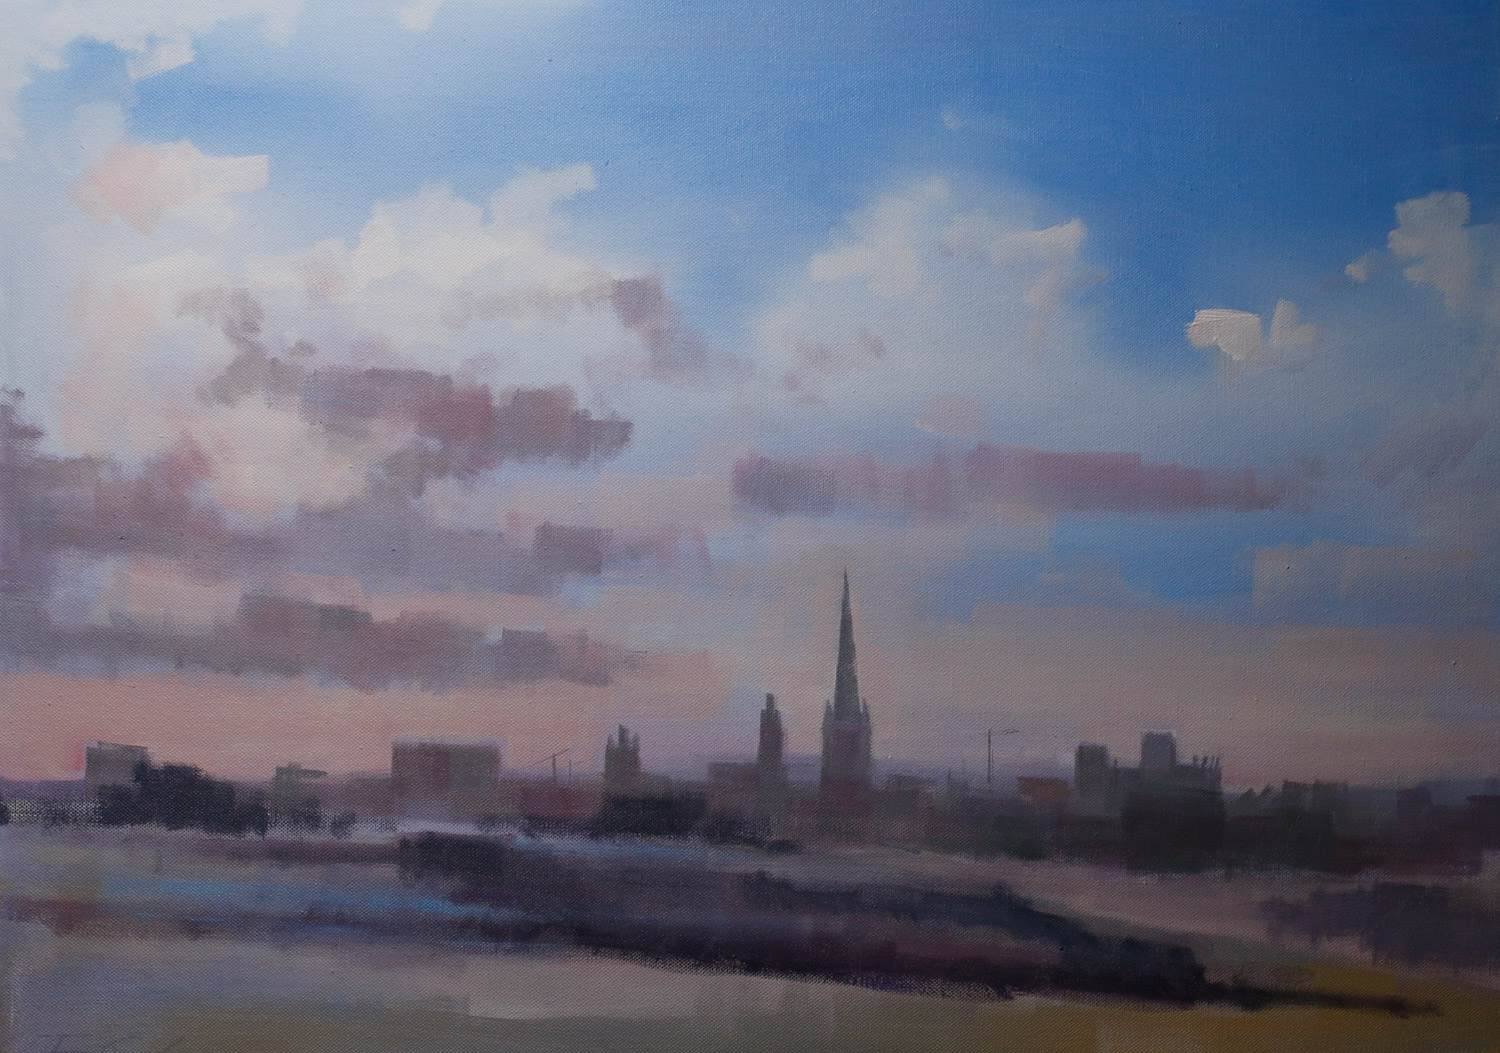 Artist Tom Cringle - Late Arrival, £350 20x28 Acrylic on Canvas at Paint Out Norwich 2015